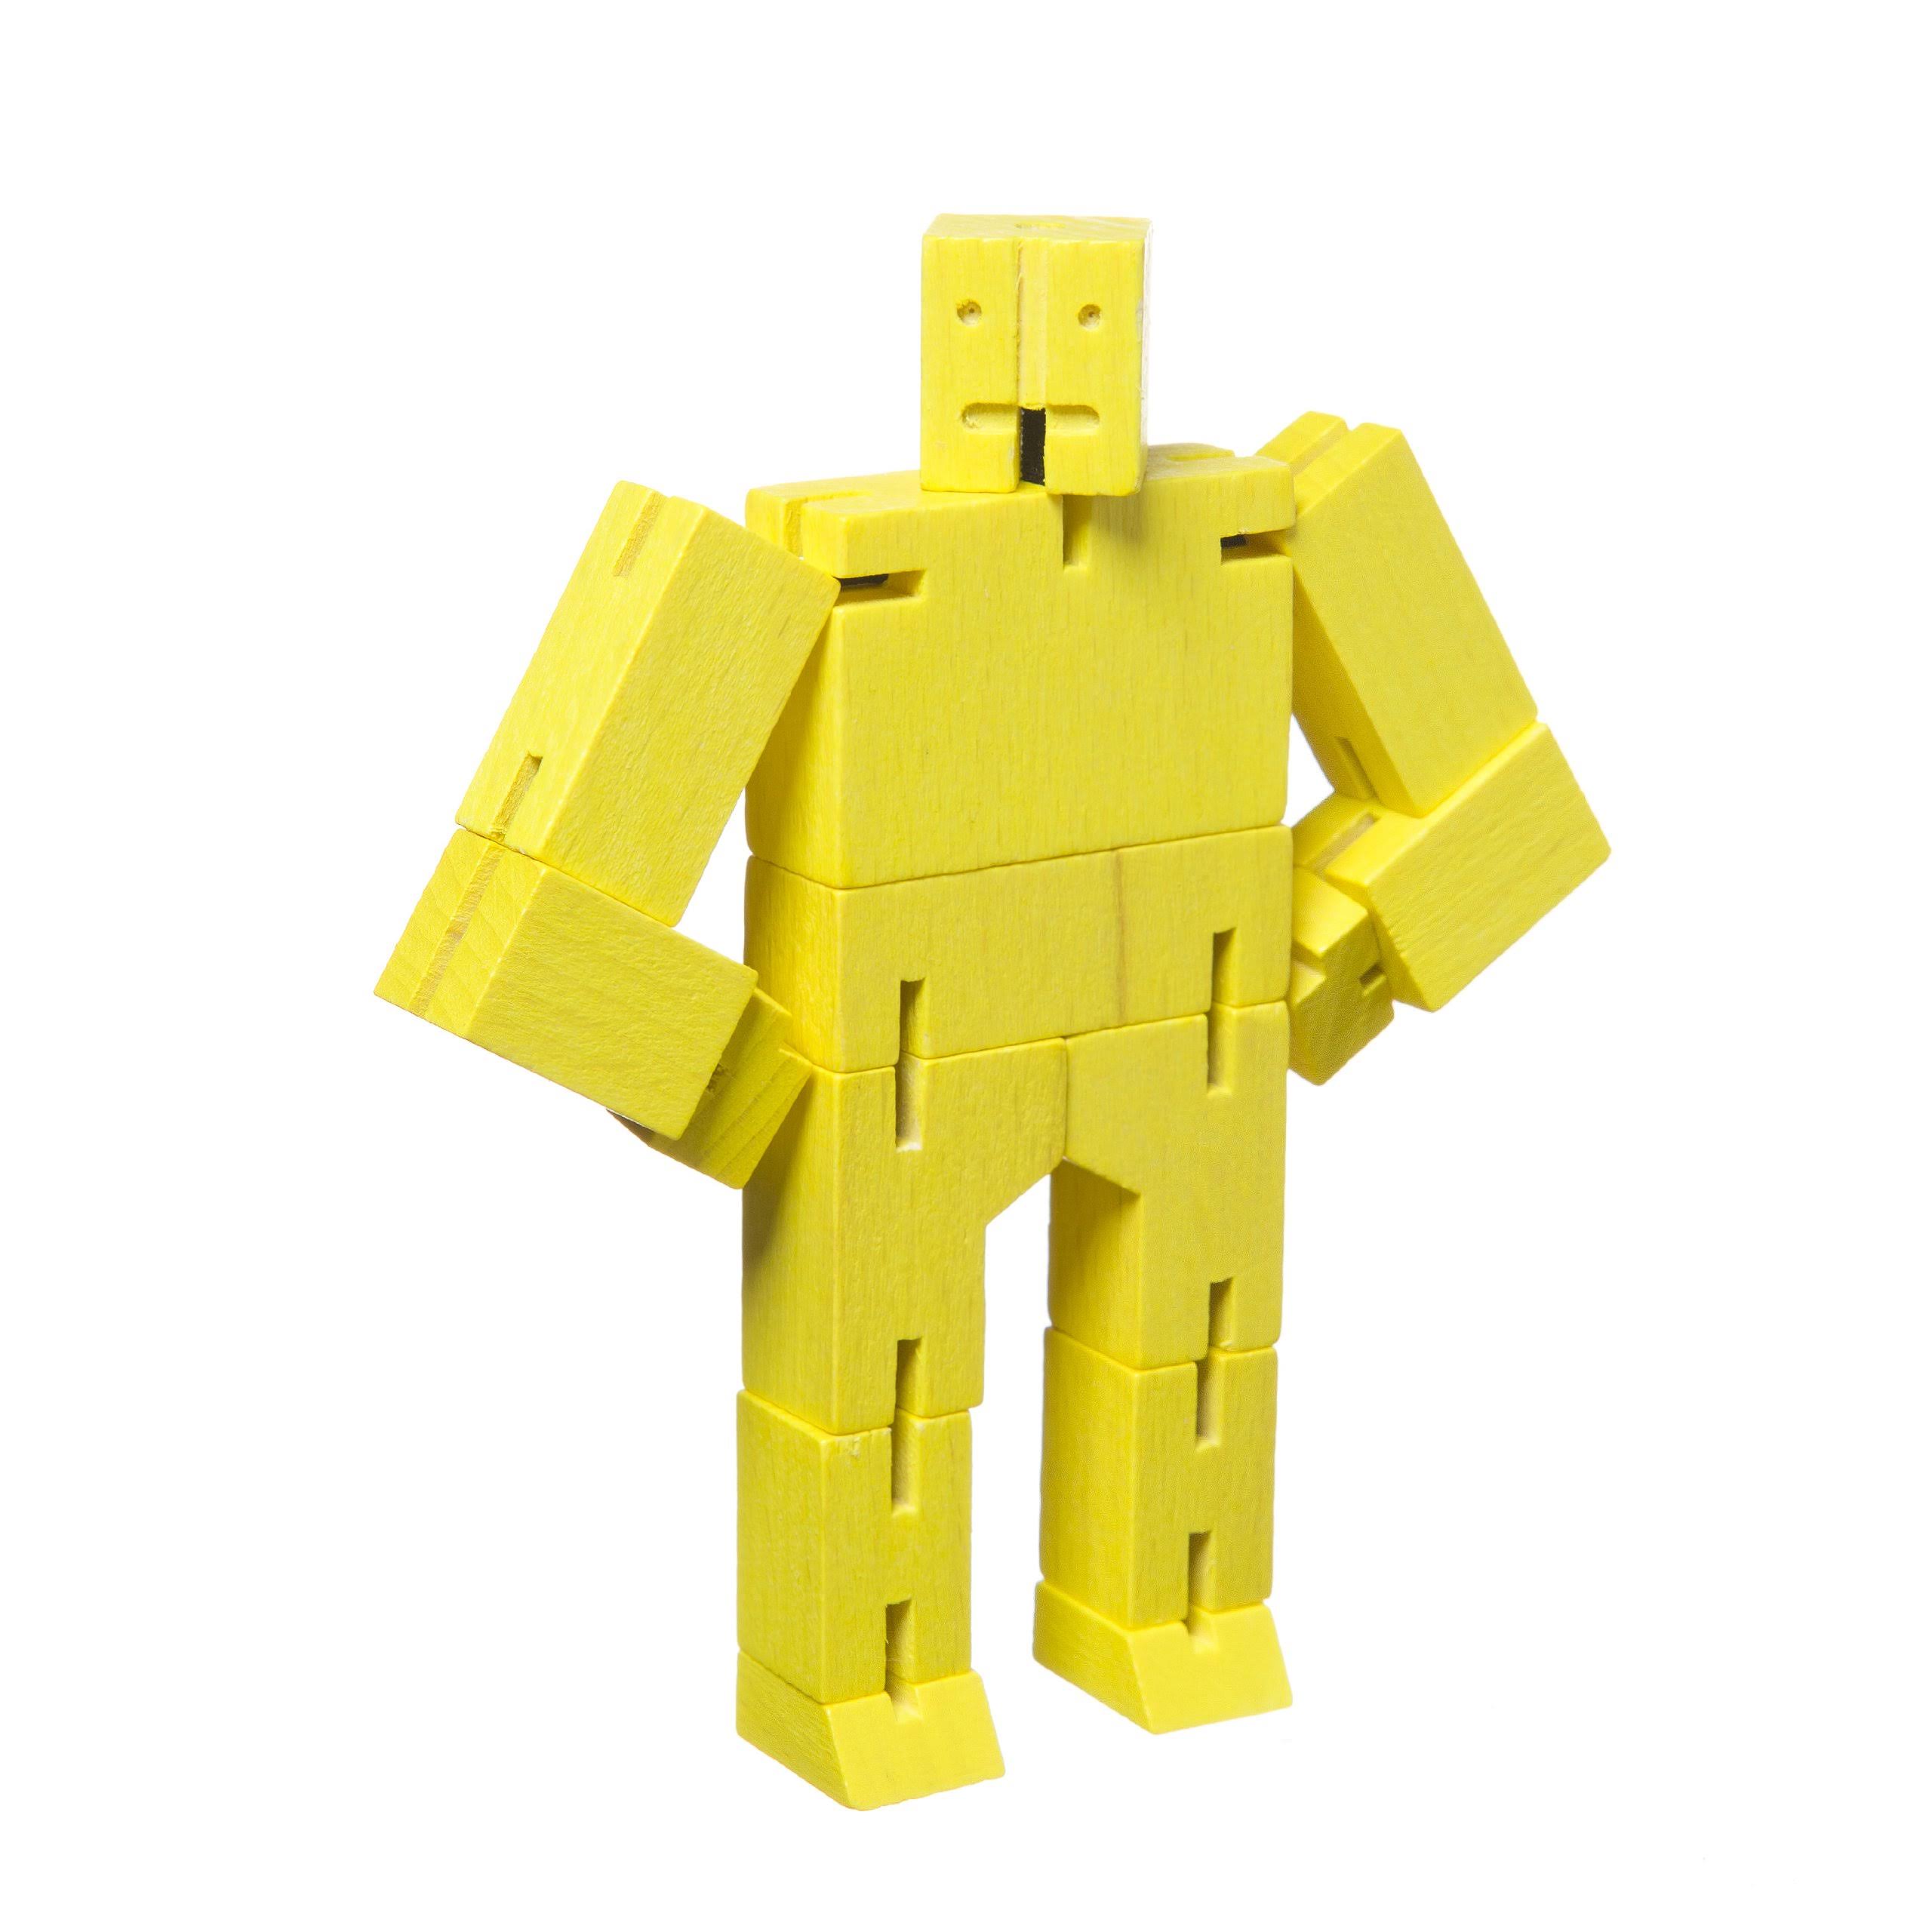 Areaware Micro Cubebot Brain Teaser Puzzle - Yellow